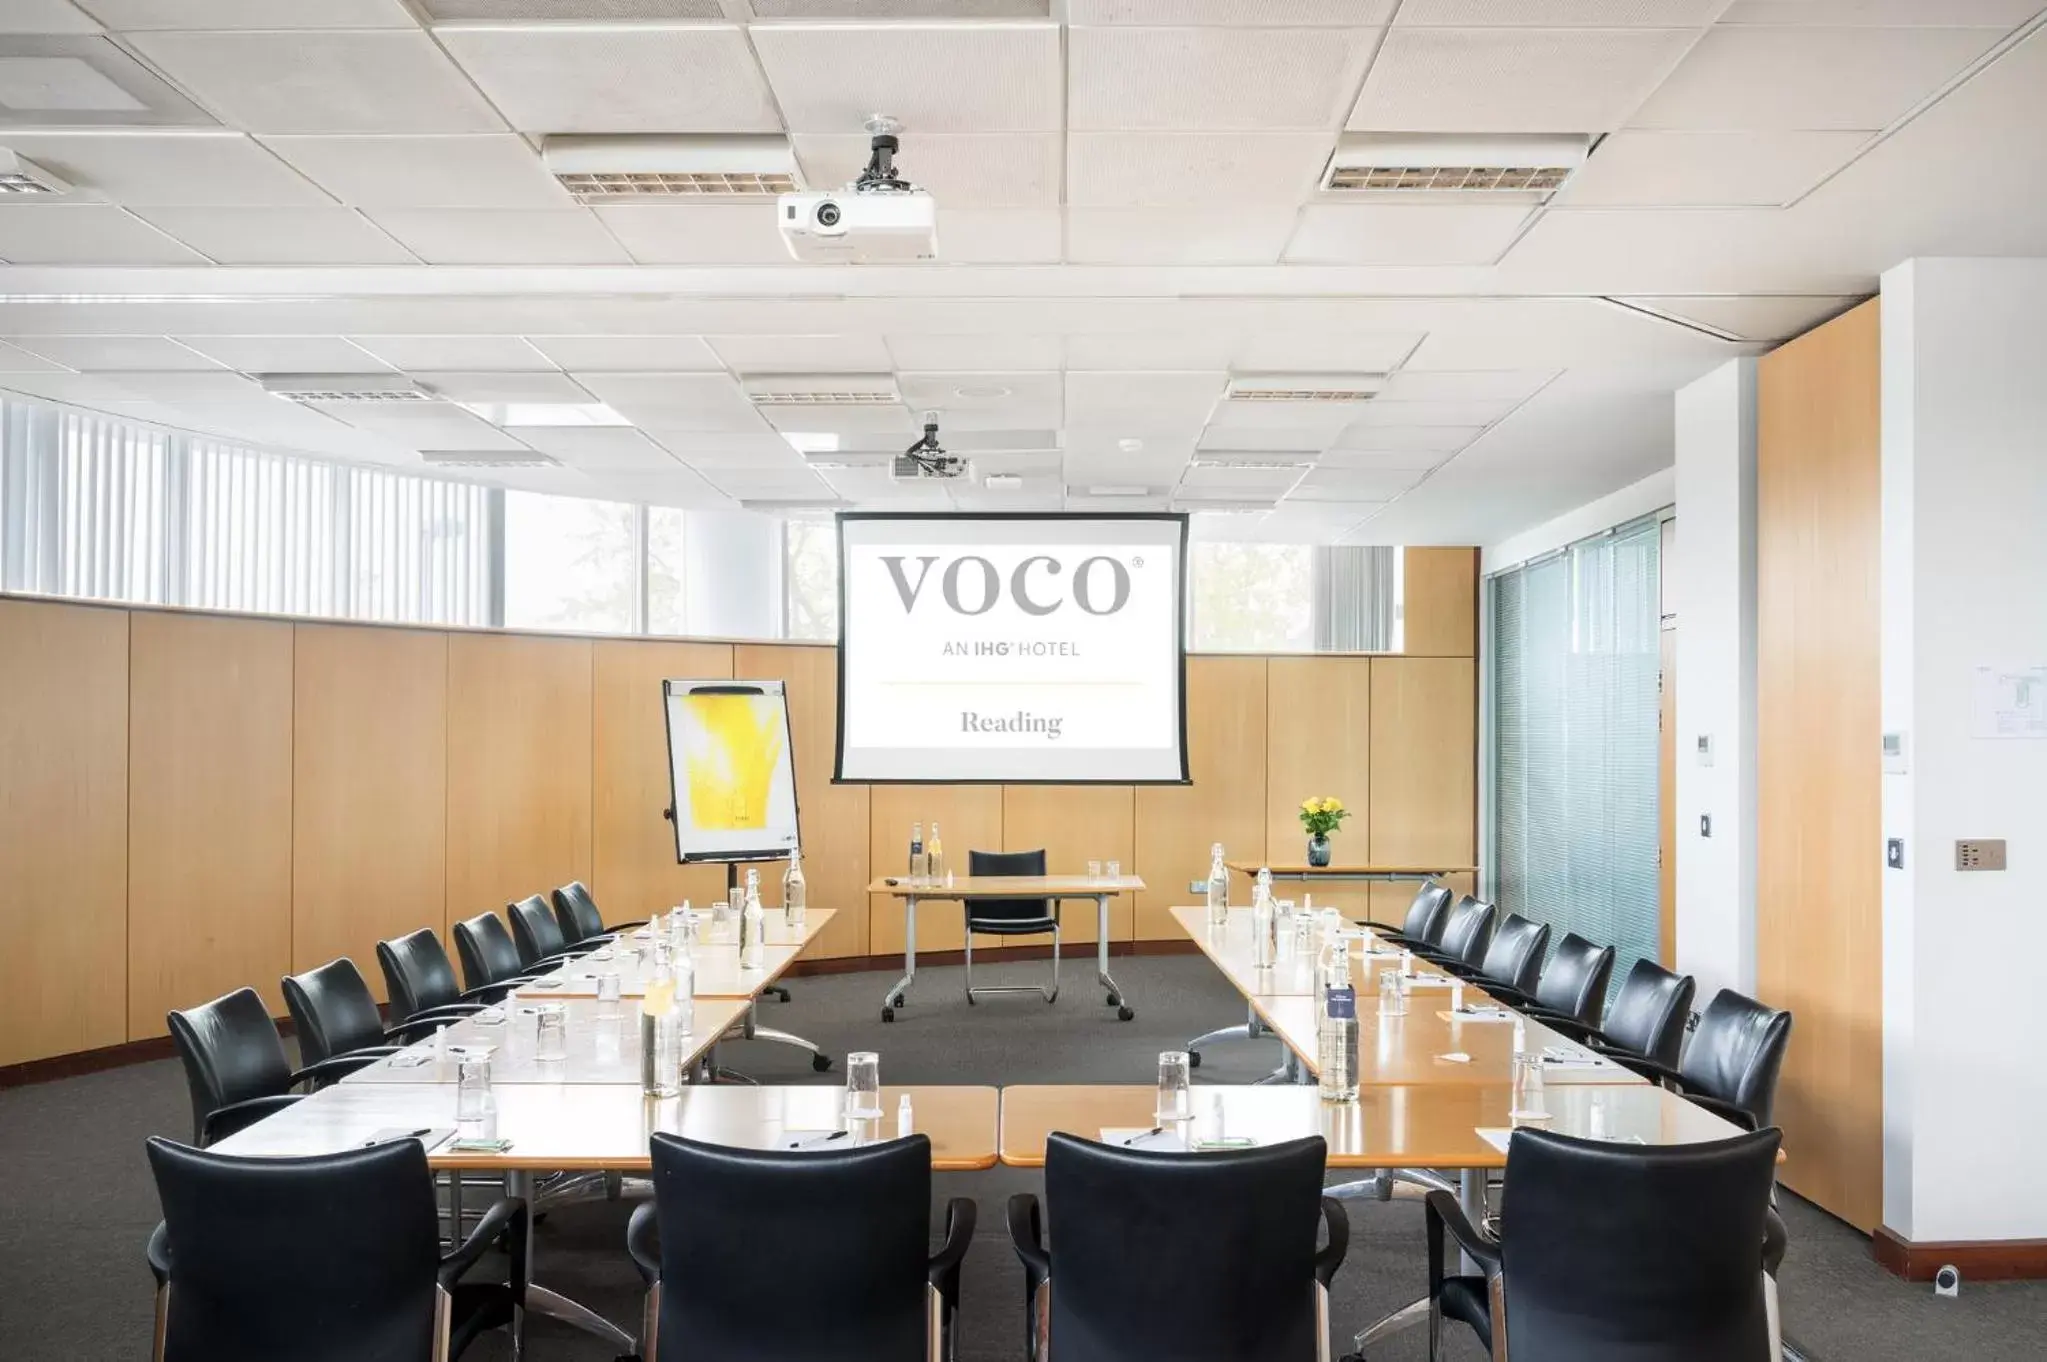 Meeting/conference room in voco Reading